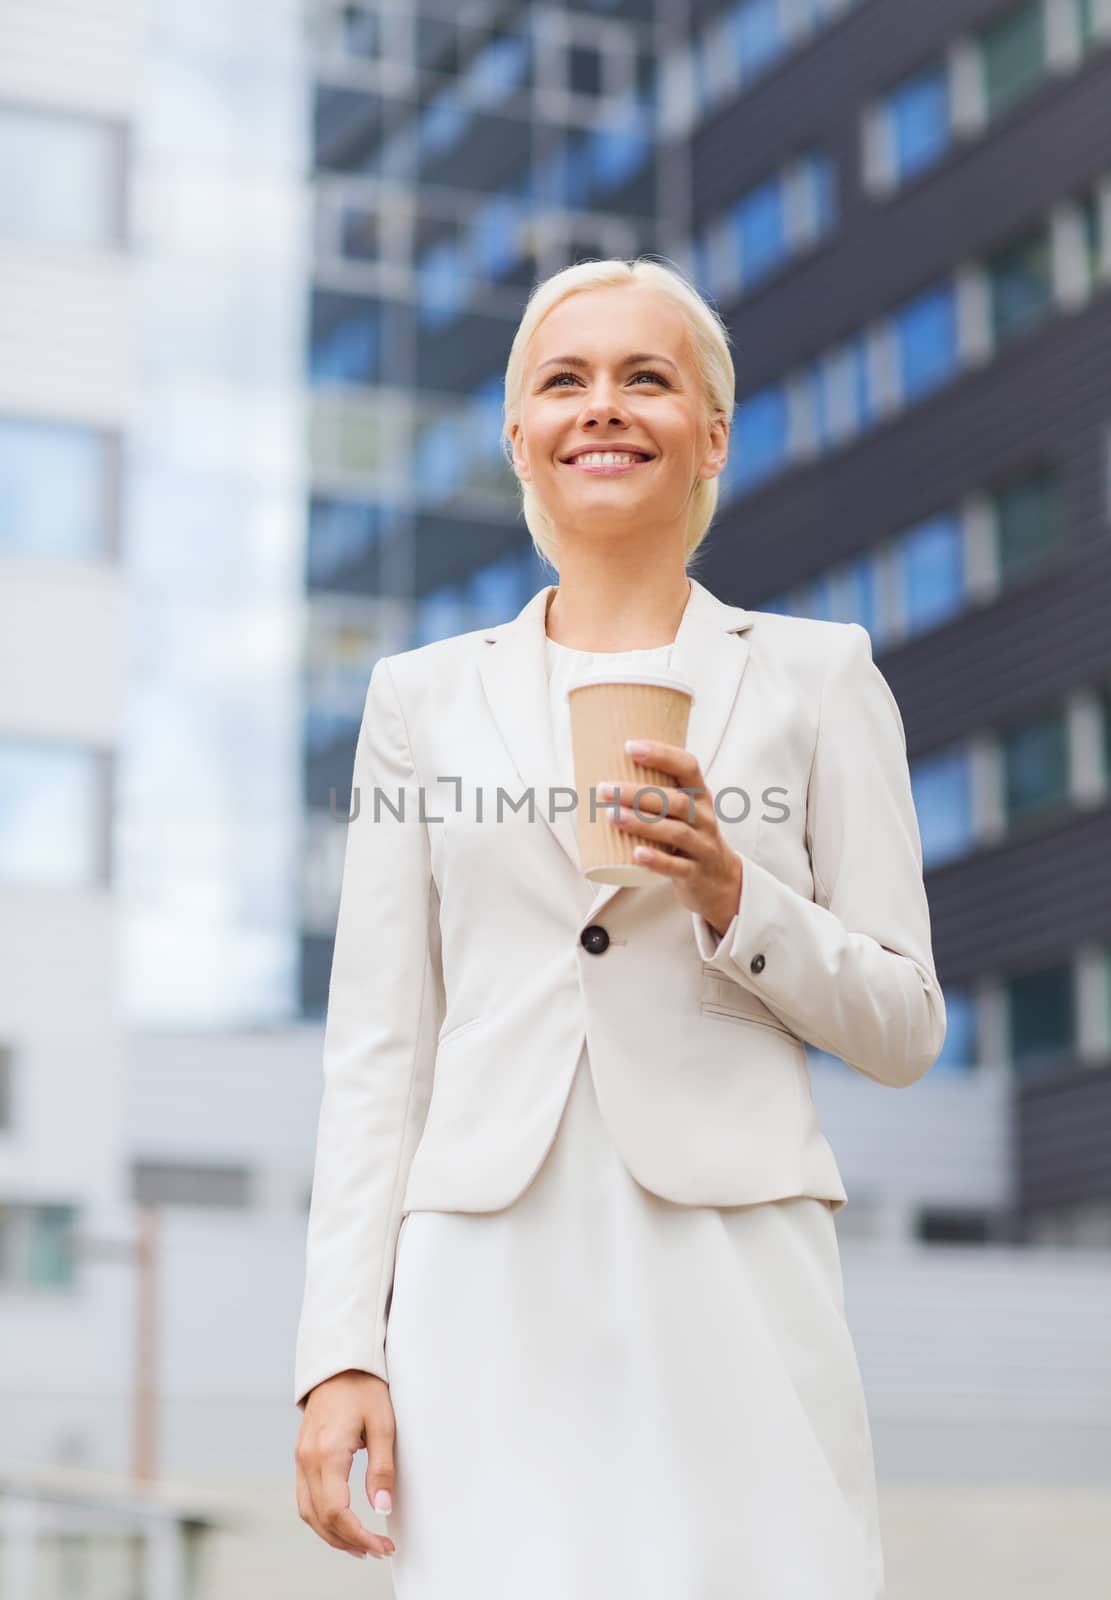 business, hot drinks and people and concept - young smiling businesswoman with paper coffee cup over office building